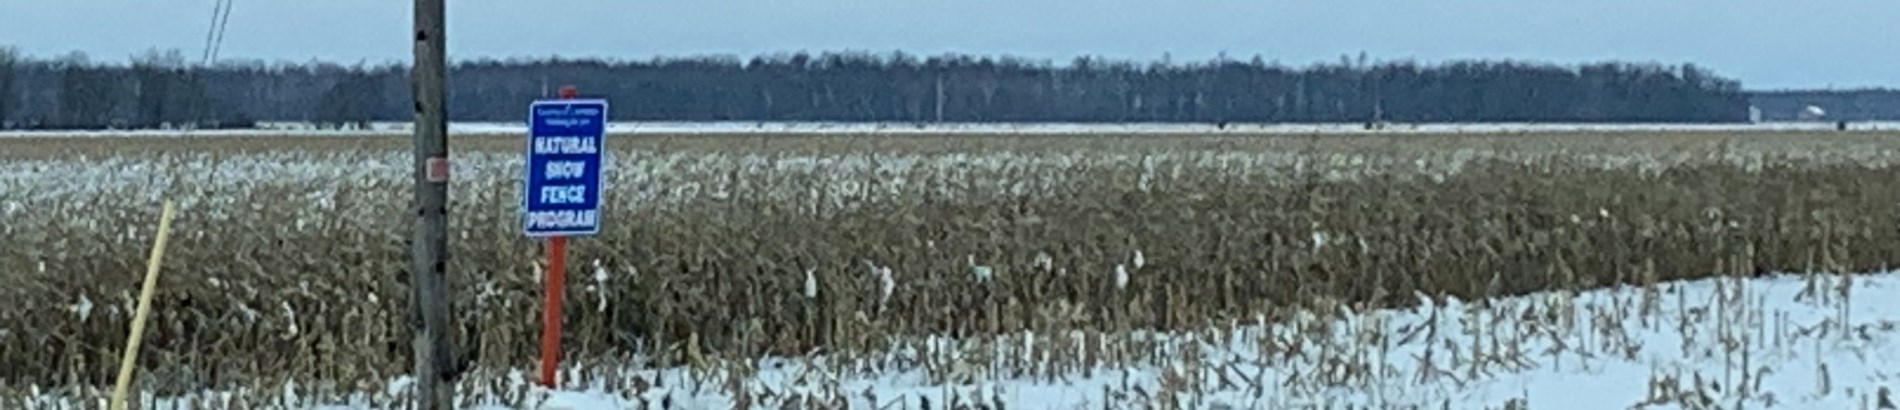 Row of corn used in the Living Snow Fence program, with blue sign showing program name